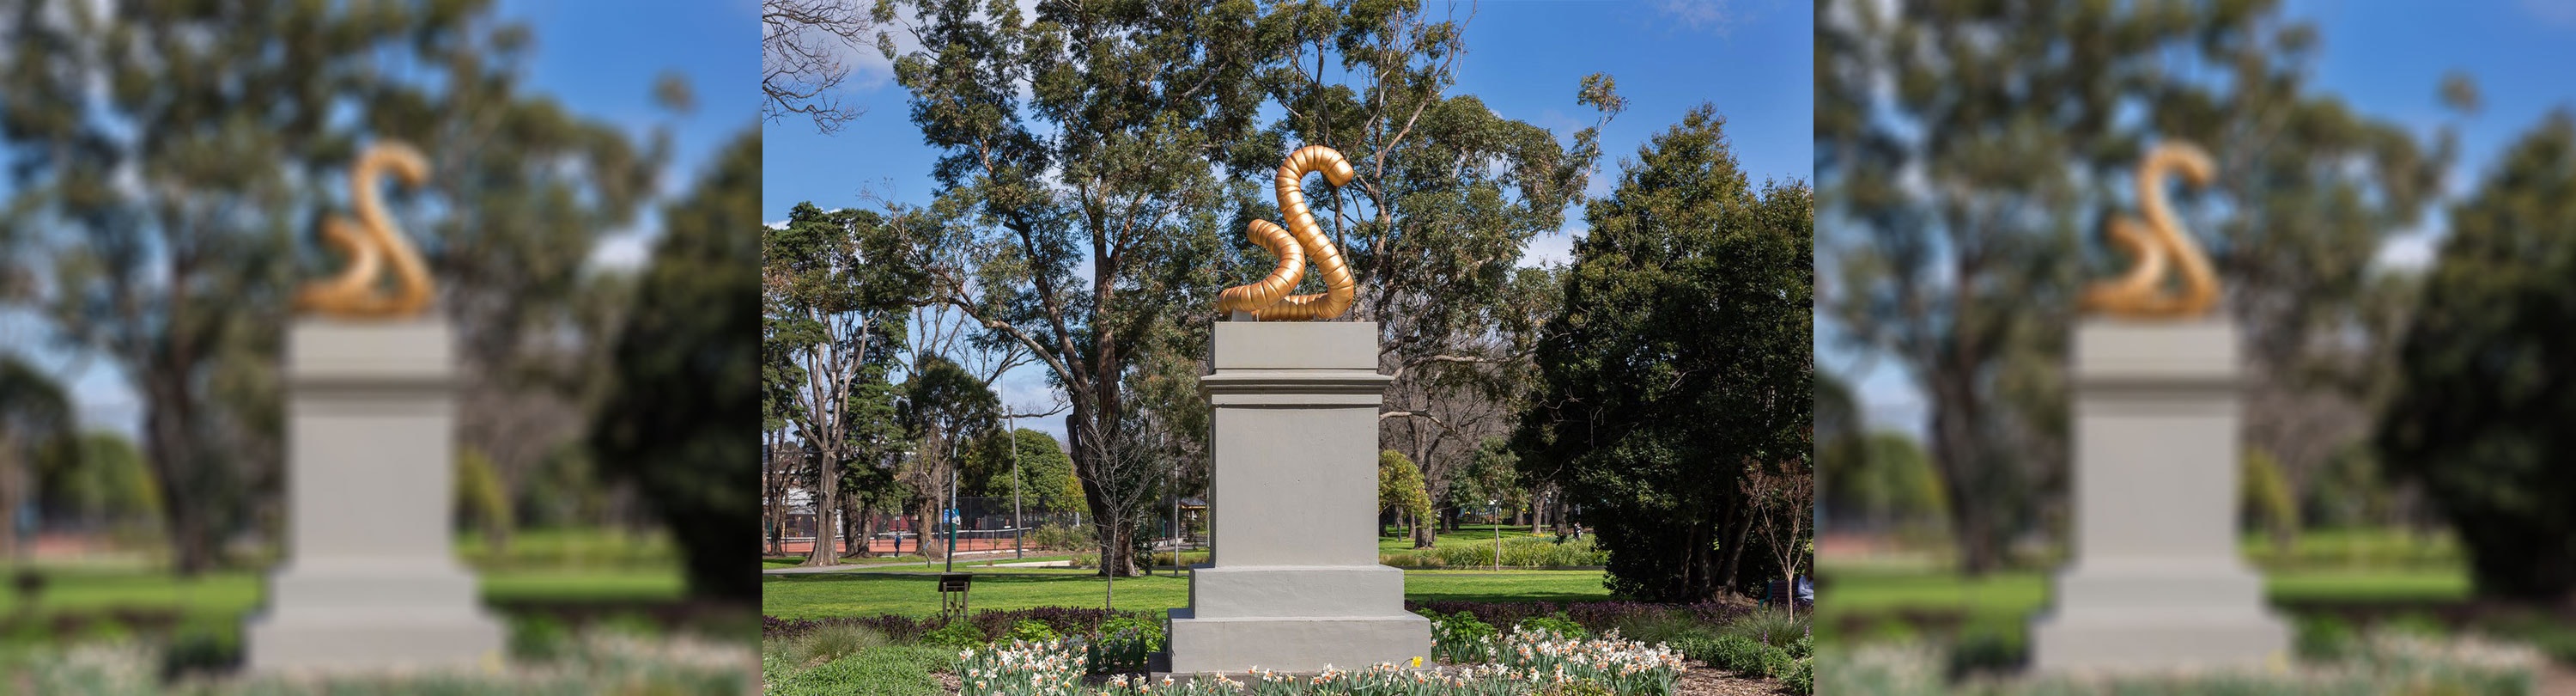 A sculpture of a golden worm that is curled sitting on top of a grey stone plinth